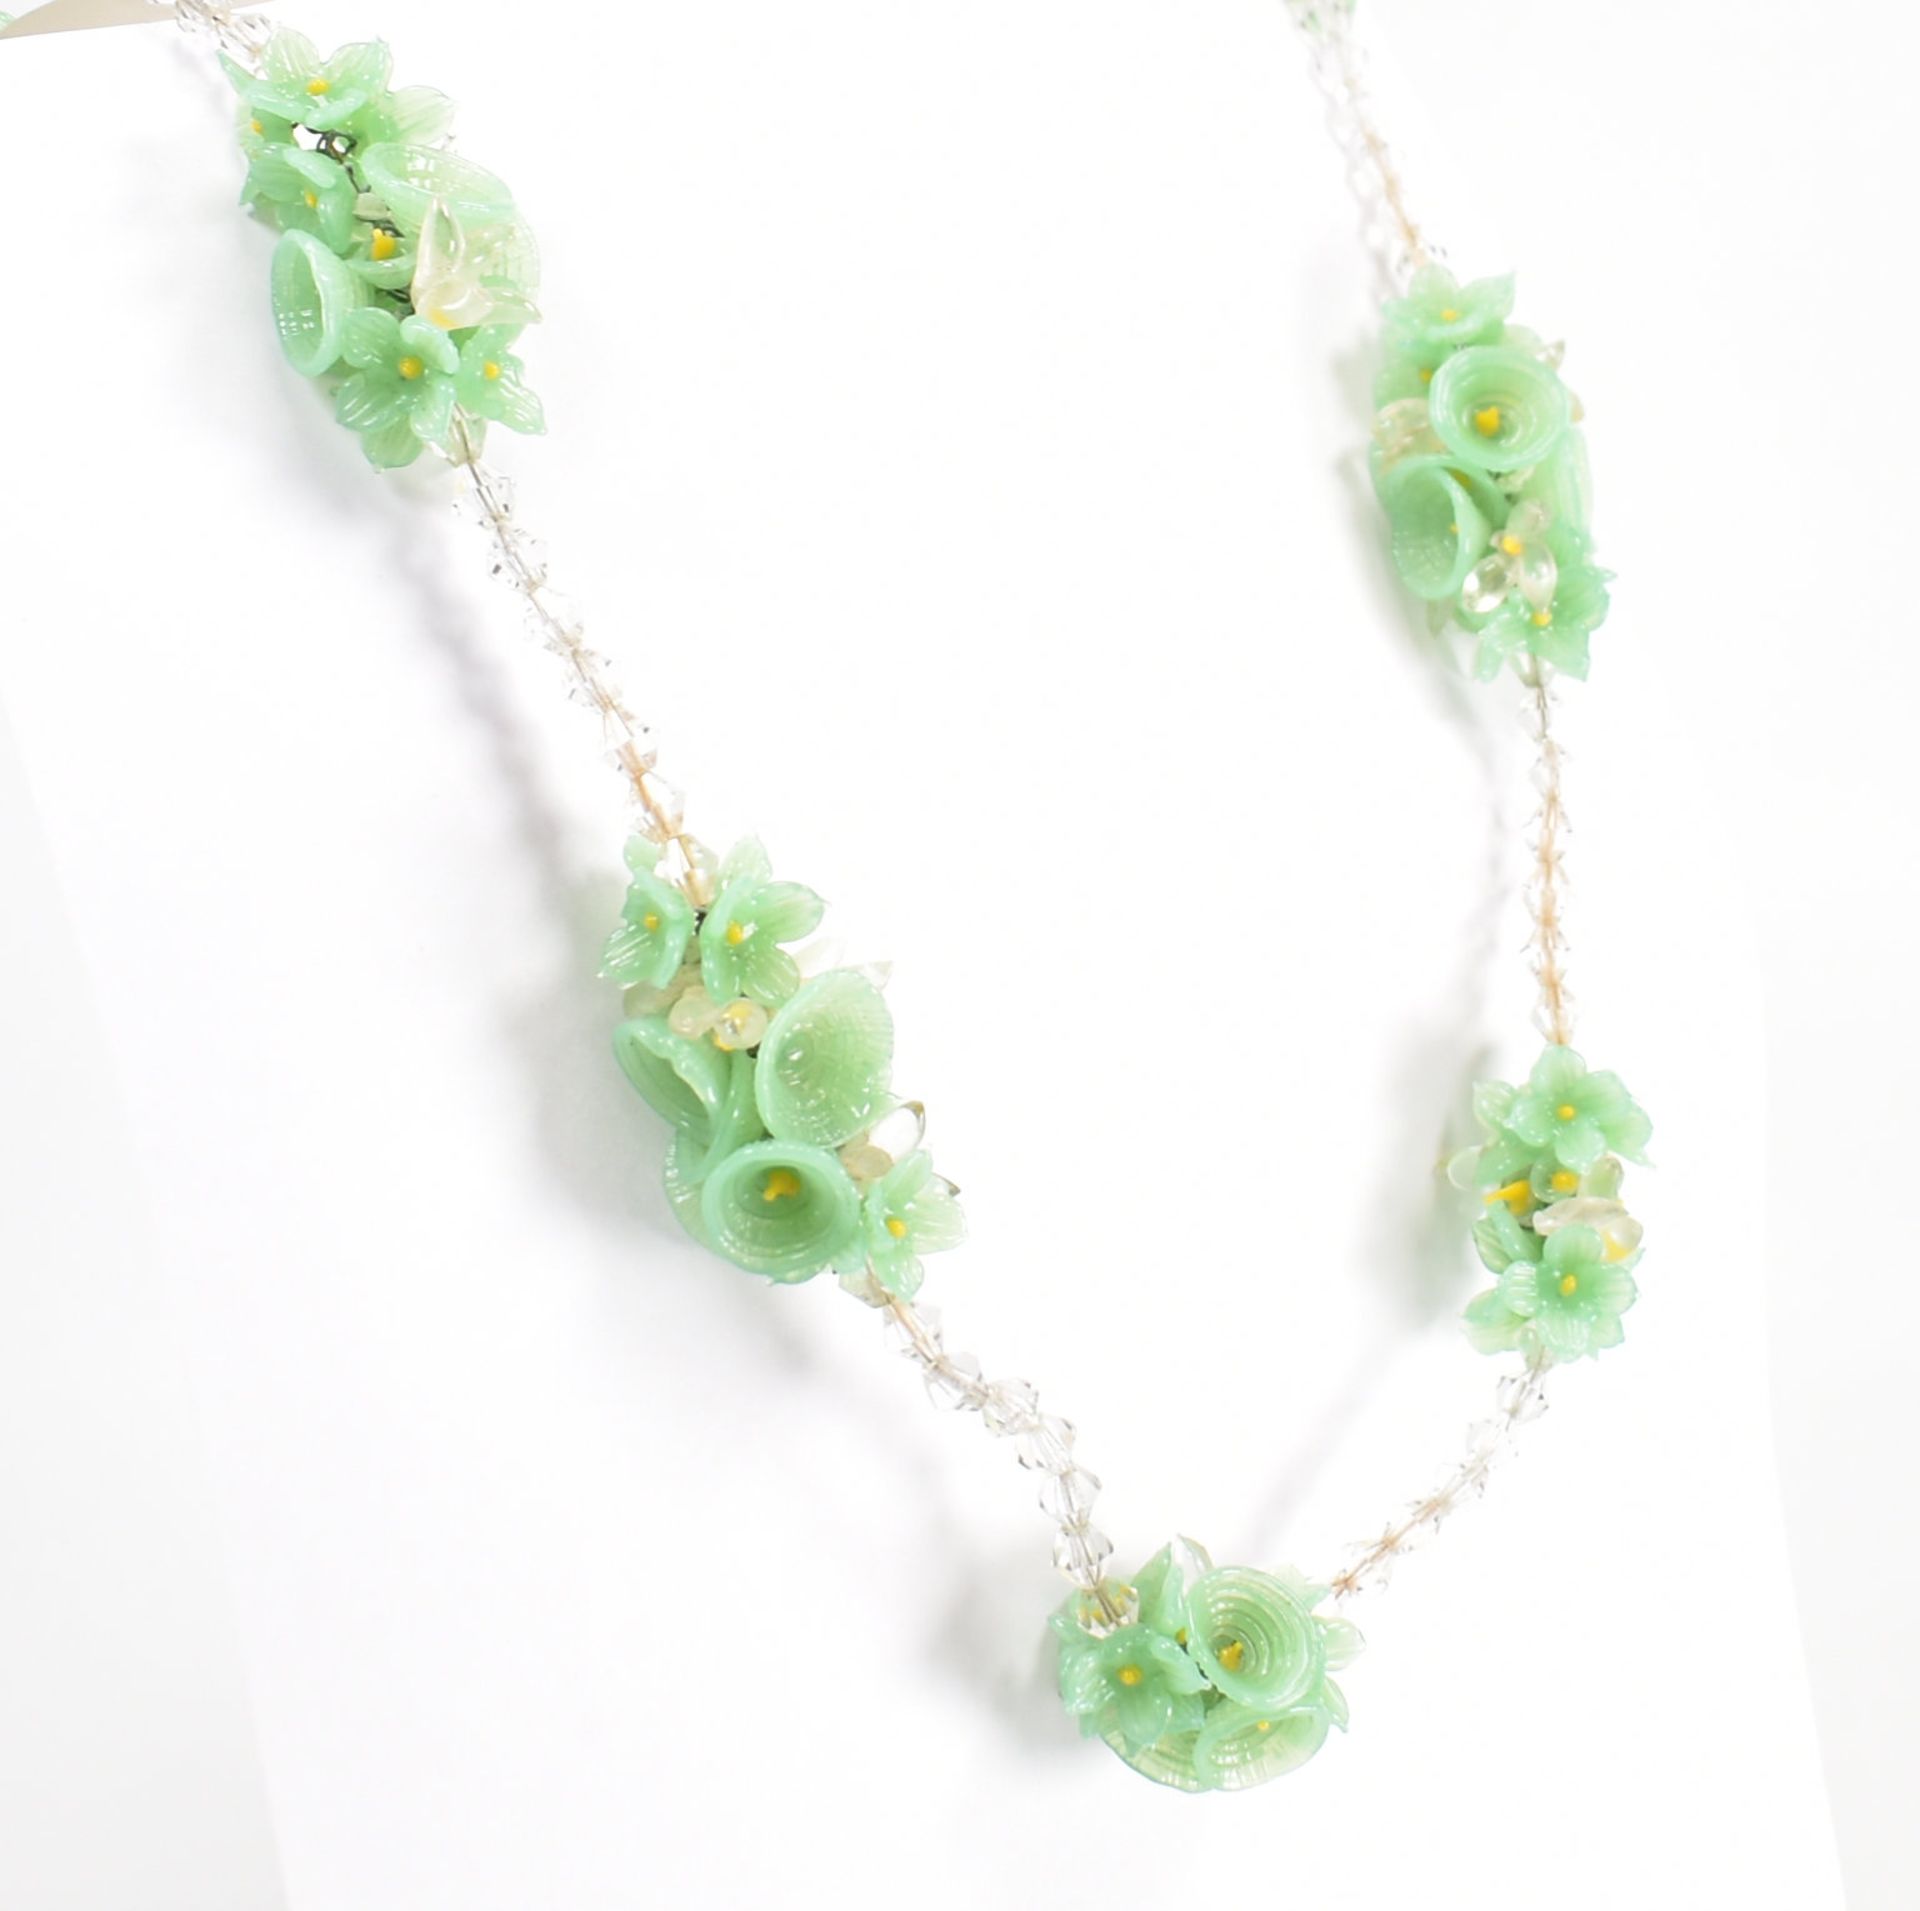 FRENCH 1930S GLASS BEADED NECKLACE - Image 4 of 5